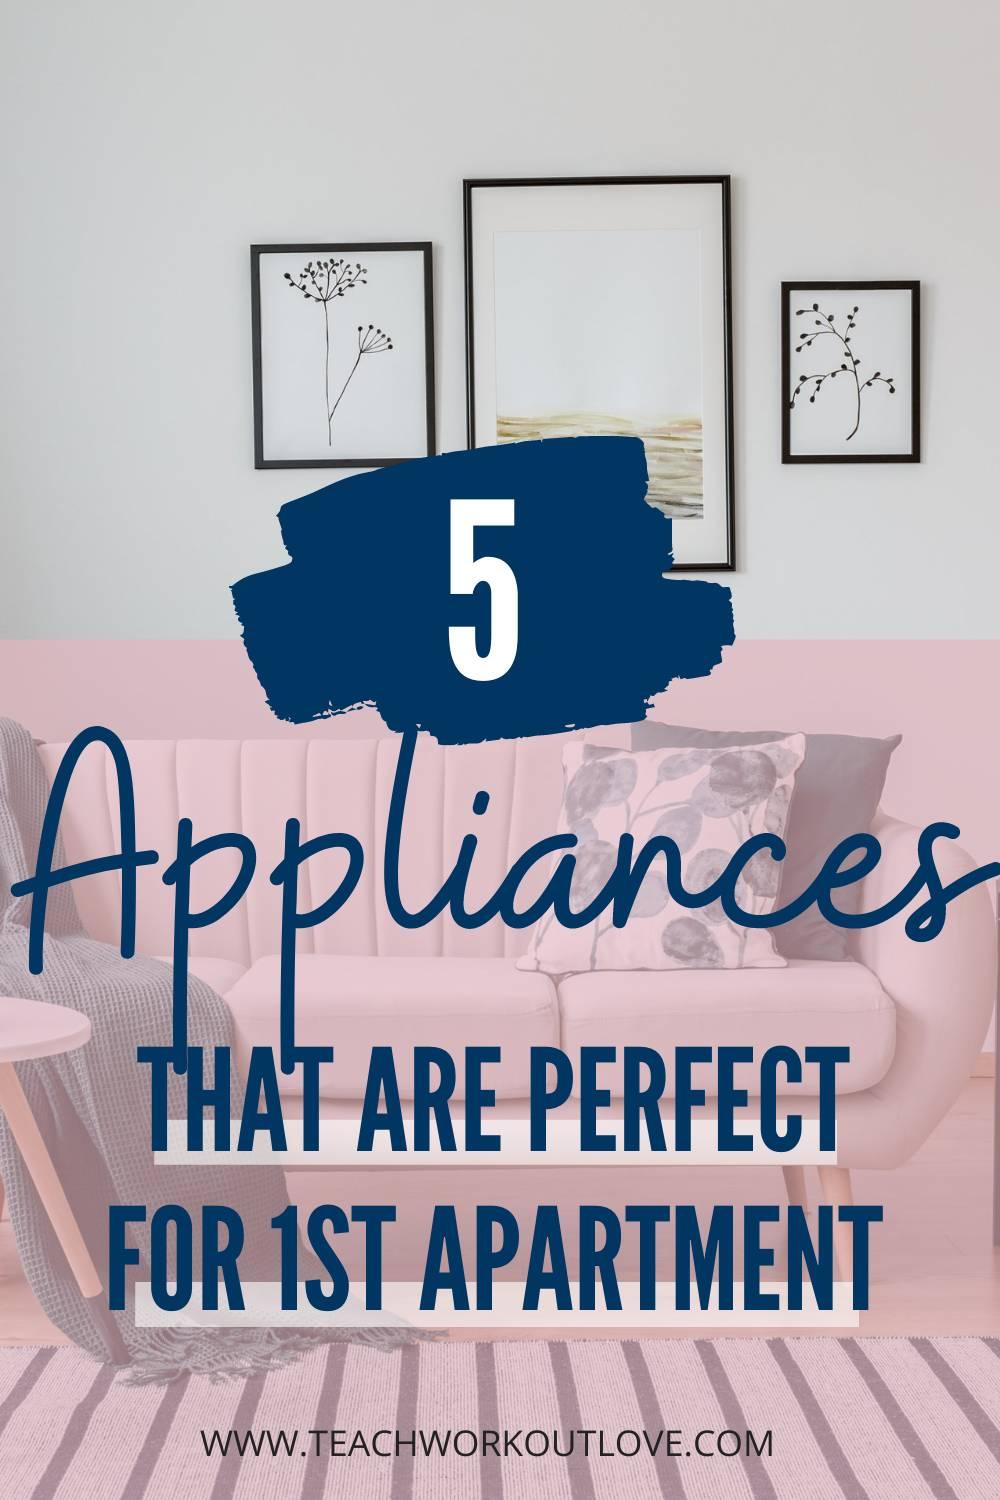 If you're moving to your first apartment, here are five appliances you might want to find for your new home.